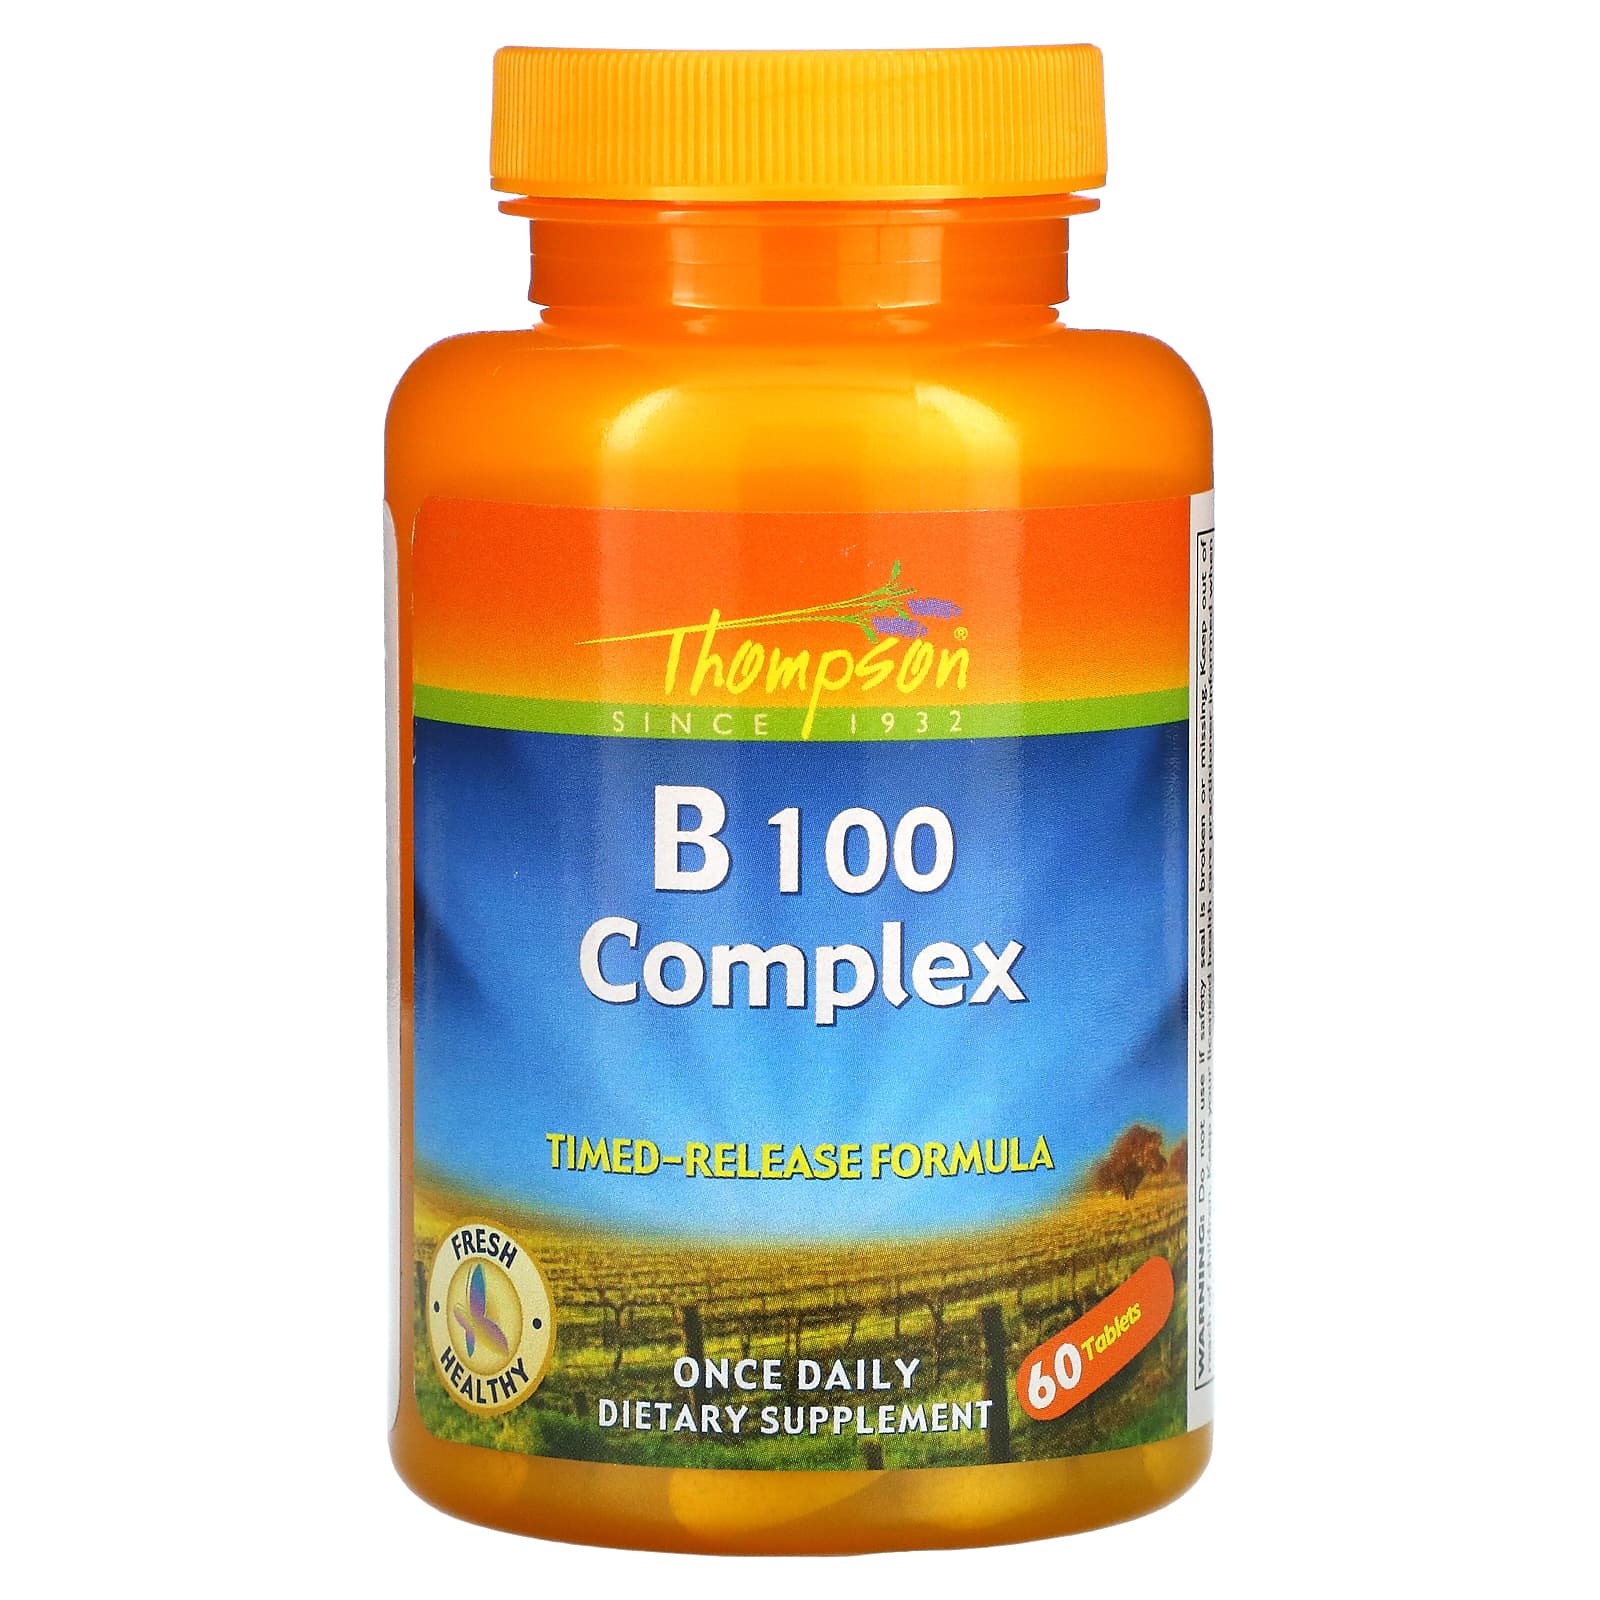 Thompson B 100 Complex TimedRelease, 60 Tablets, From Nutritional